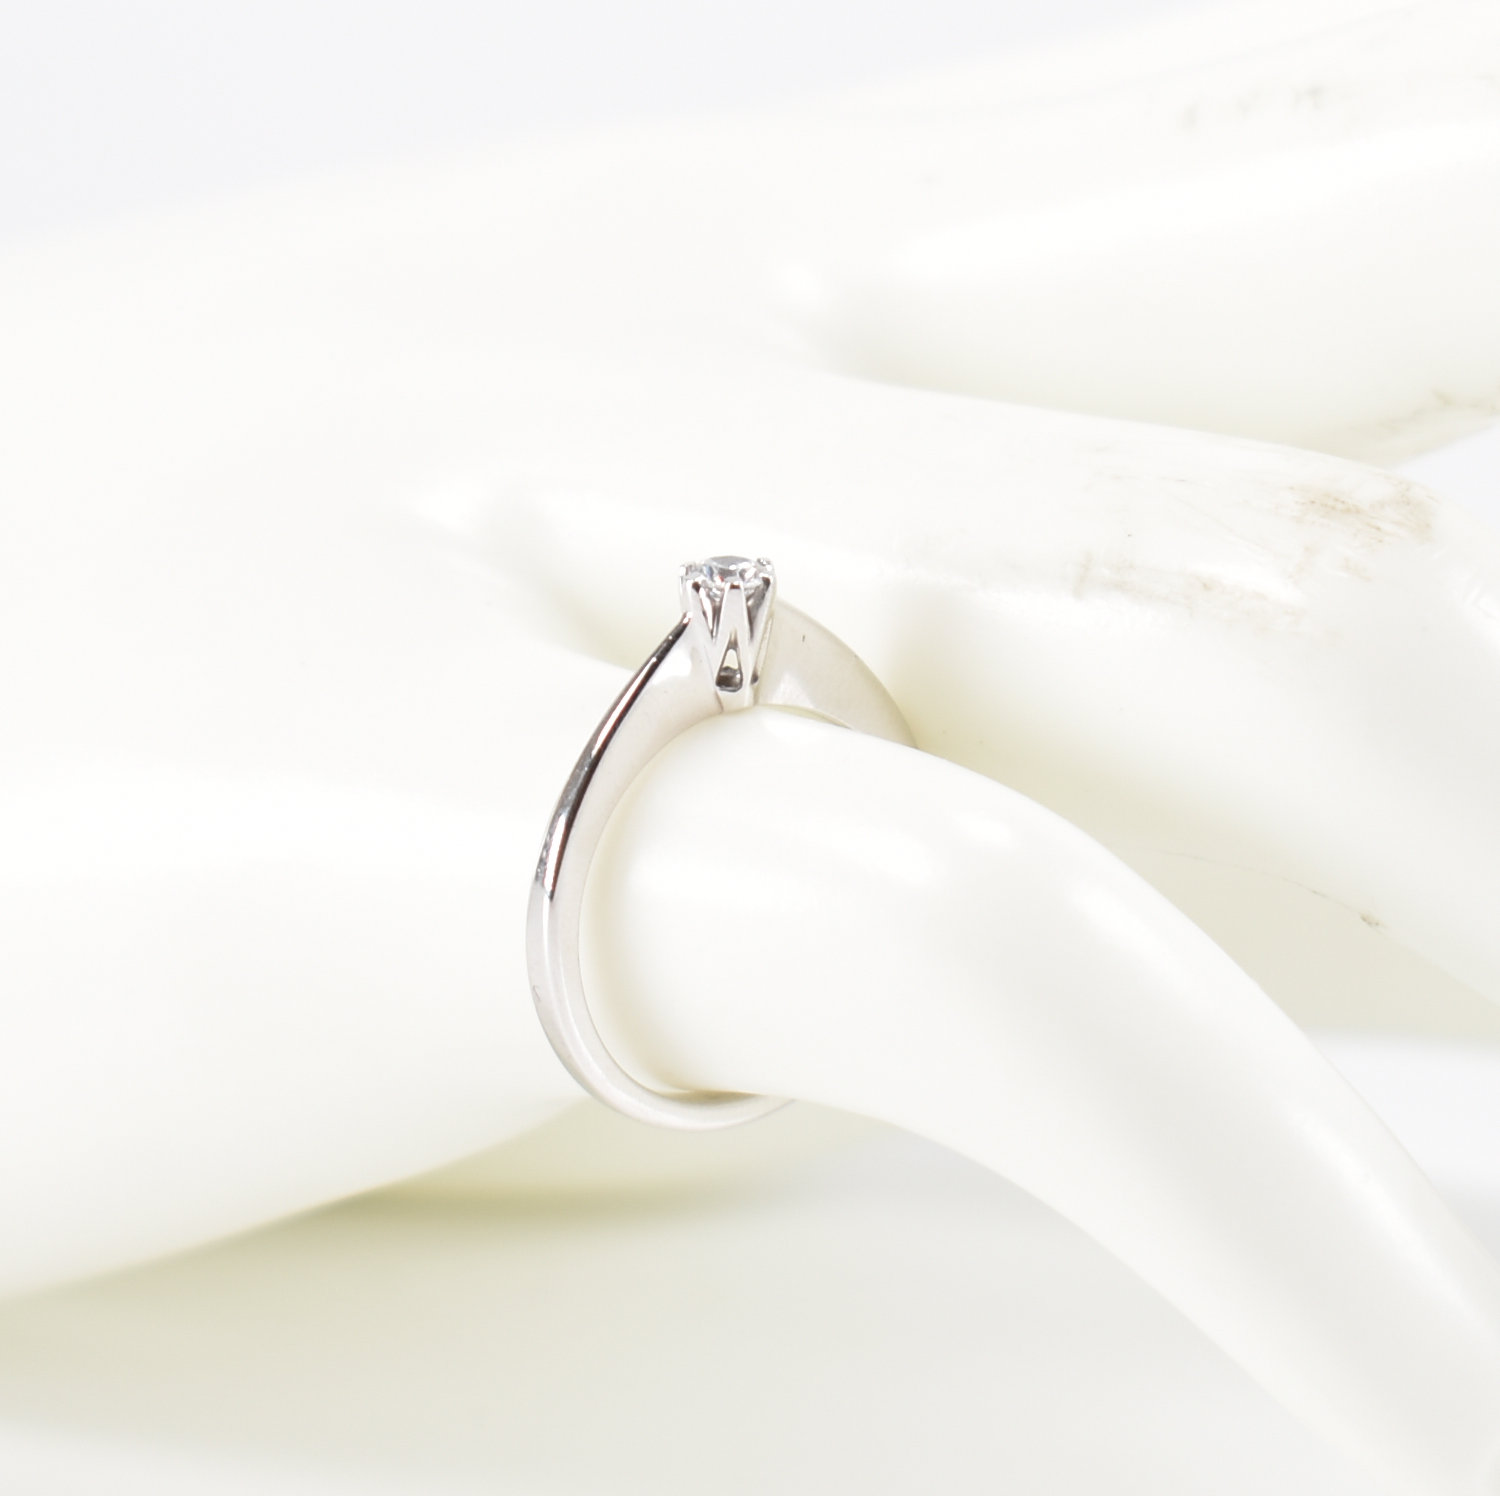 HALLMARKED 9CT GOLD CZ SOLITAIRE RING - Image 8 of 8